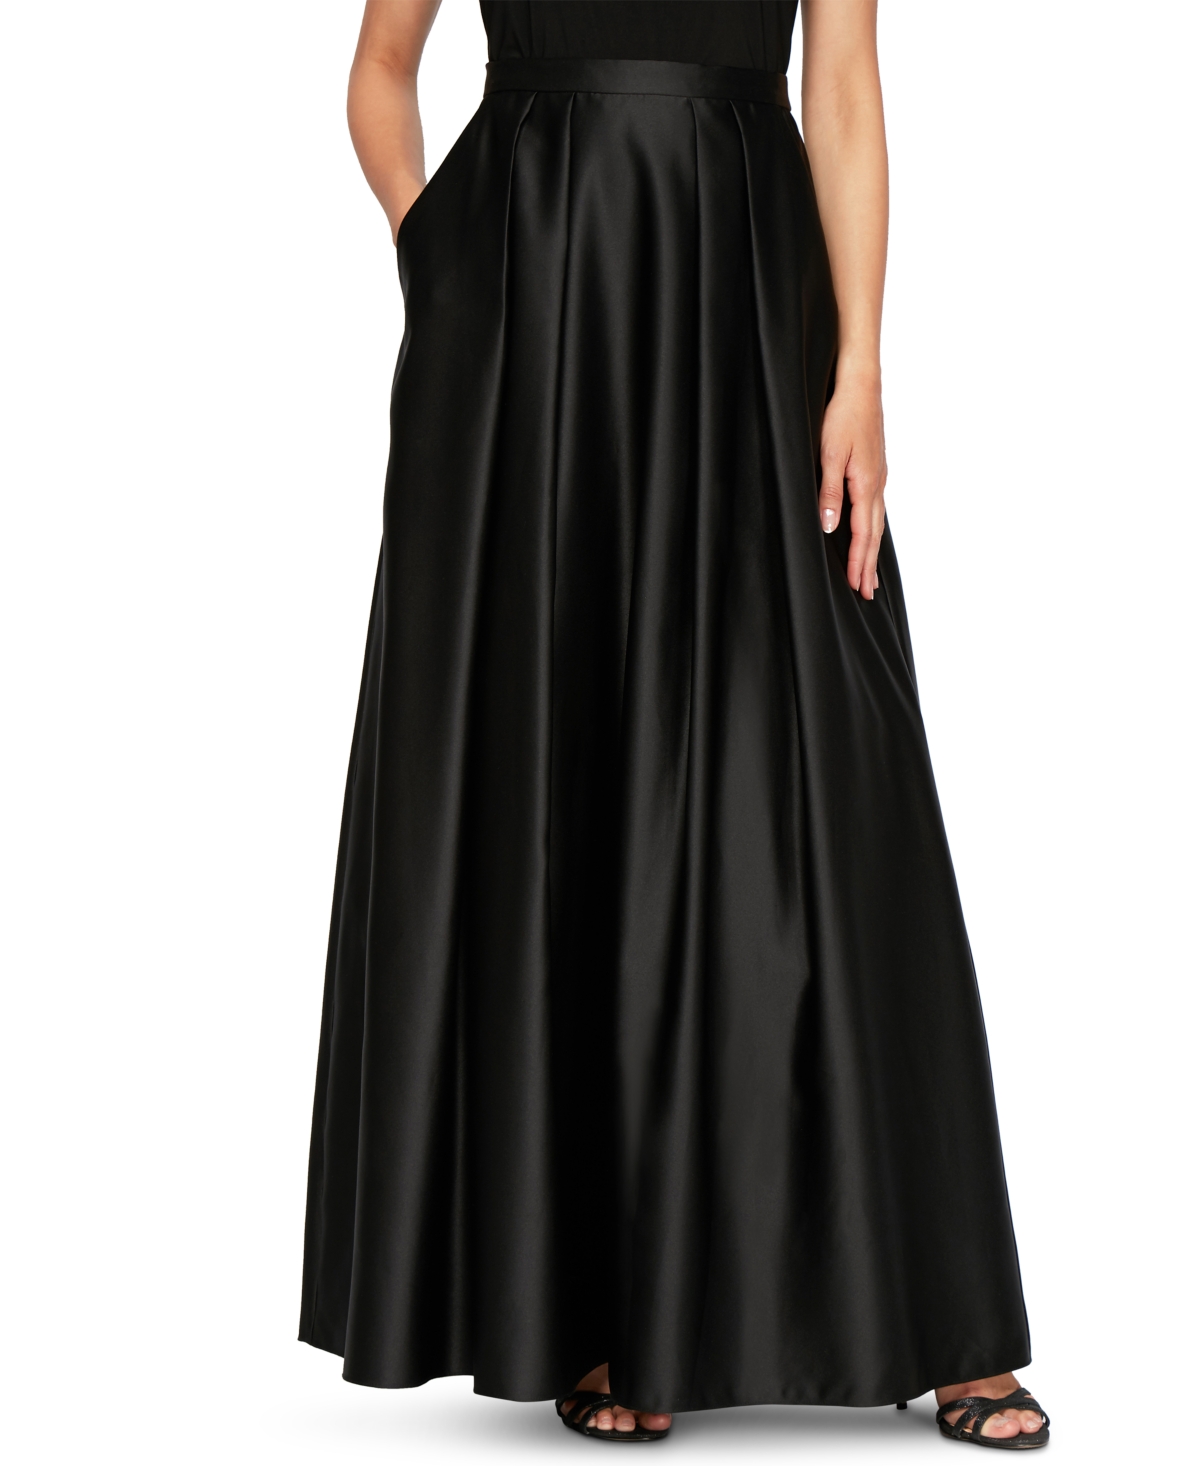 1950s History of Prom, Party, Evening and Formal Dresses Alex Evenings Pocketed Ballgown Skirt - Black $119.00 AT vintagedancer.com